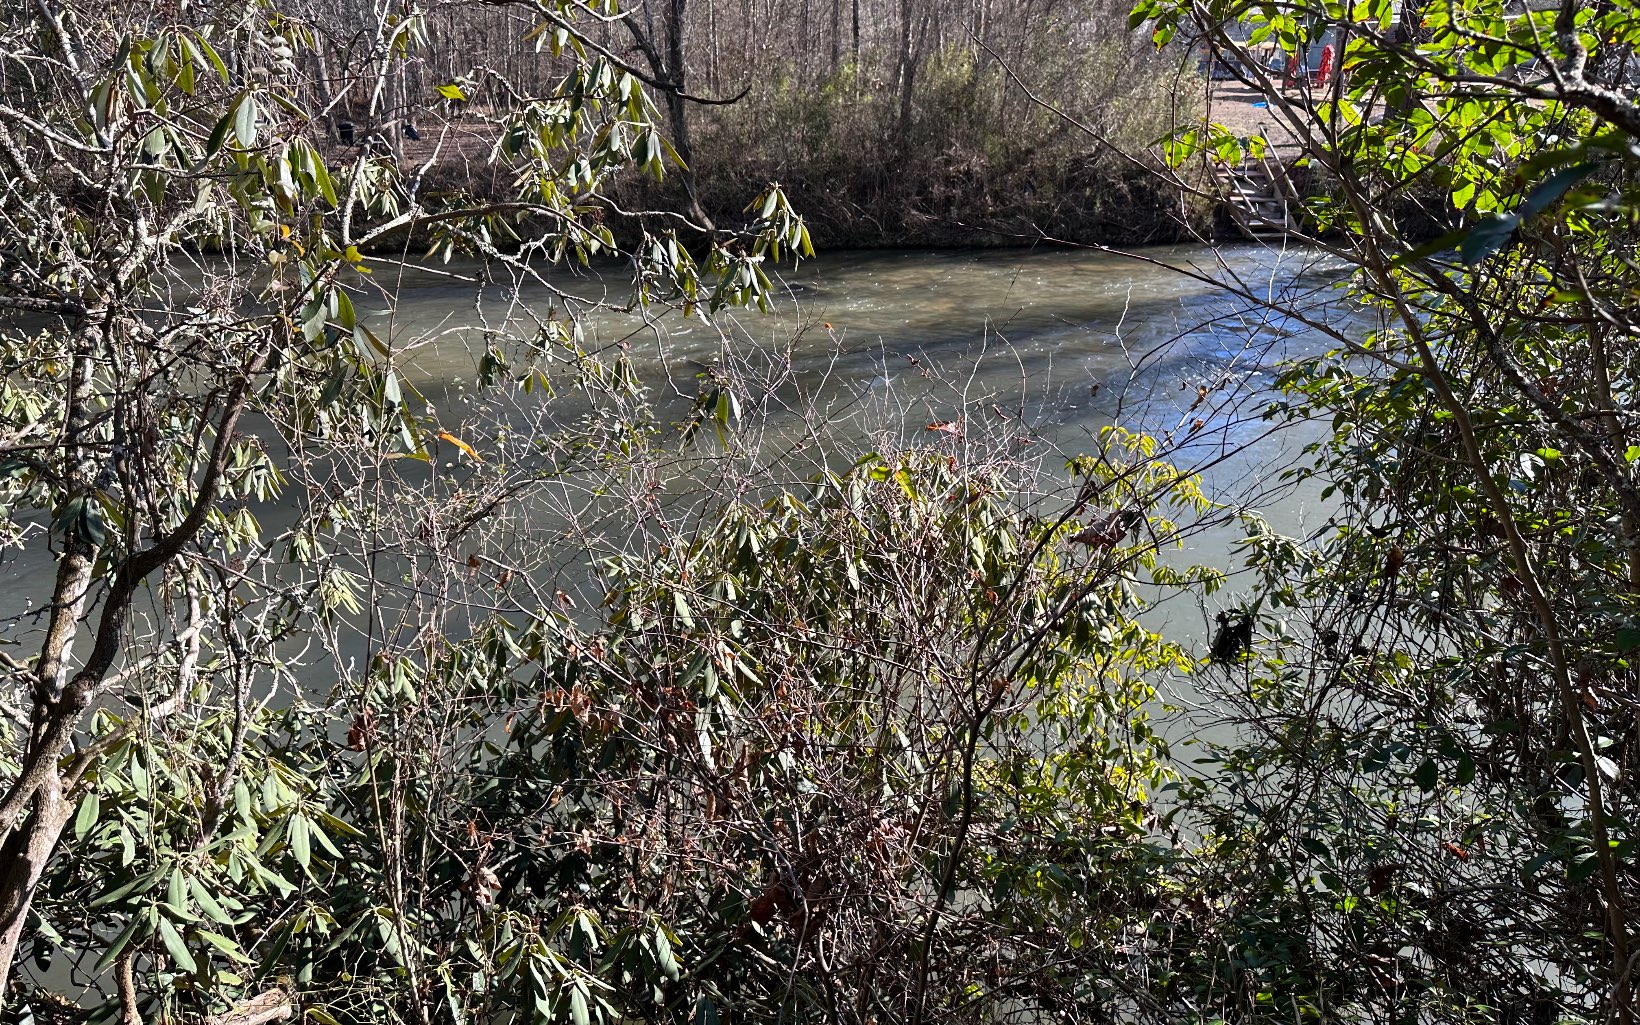 AMAZING RIVER FRONT LOT!Located ust moments from Ellijay. This level lot has already been cleared and ready for the build! The nolsy rapids of the Cartecay help drowned out the outside world. (seller has already installed hammock stands close to the river). Lot is clear enough to walk from front to back and long enough to be private from the road. Property is located in a gated community and just a stroll away from the community Pool, covered pavilion on the river and tennis court. This is a hard find in Ellijay, take advantage before it's gone.